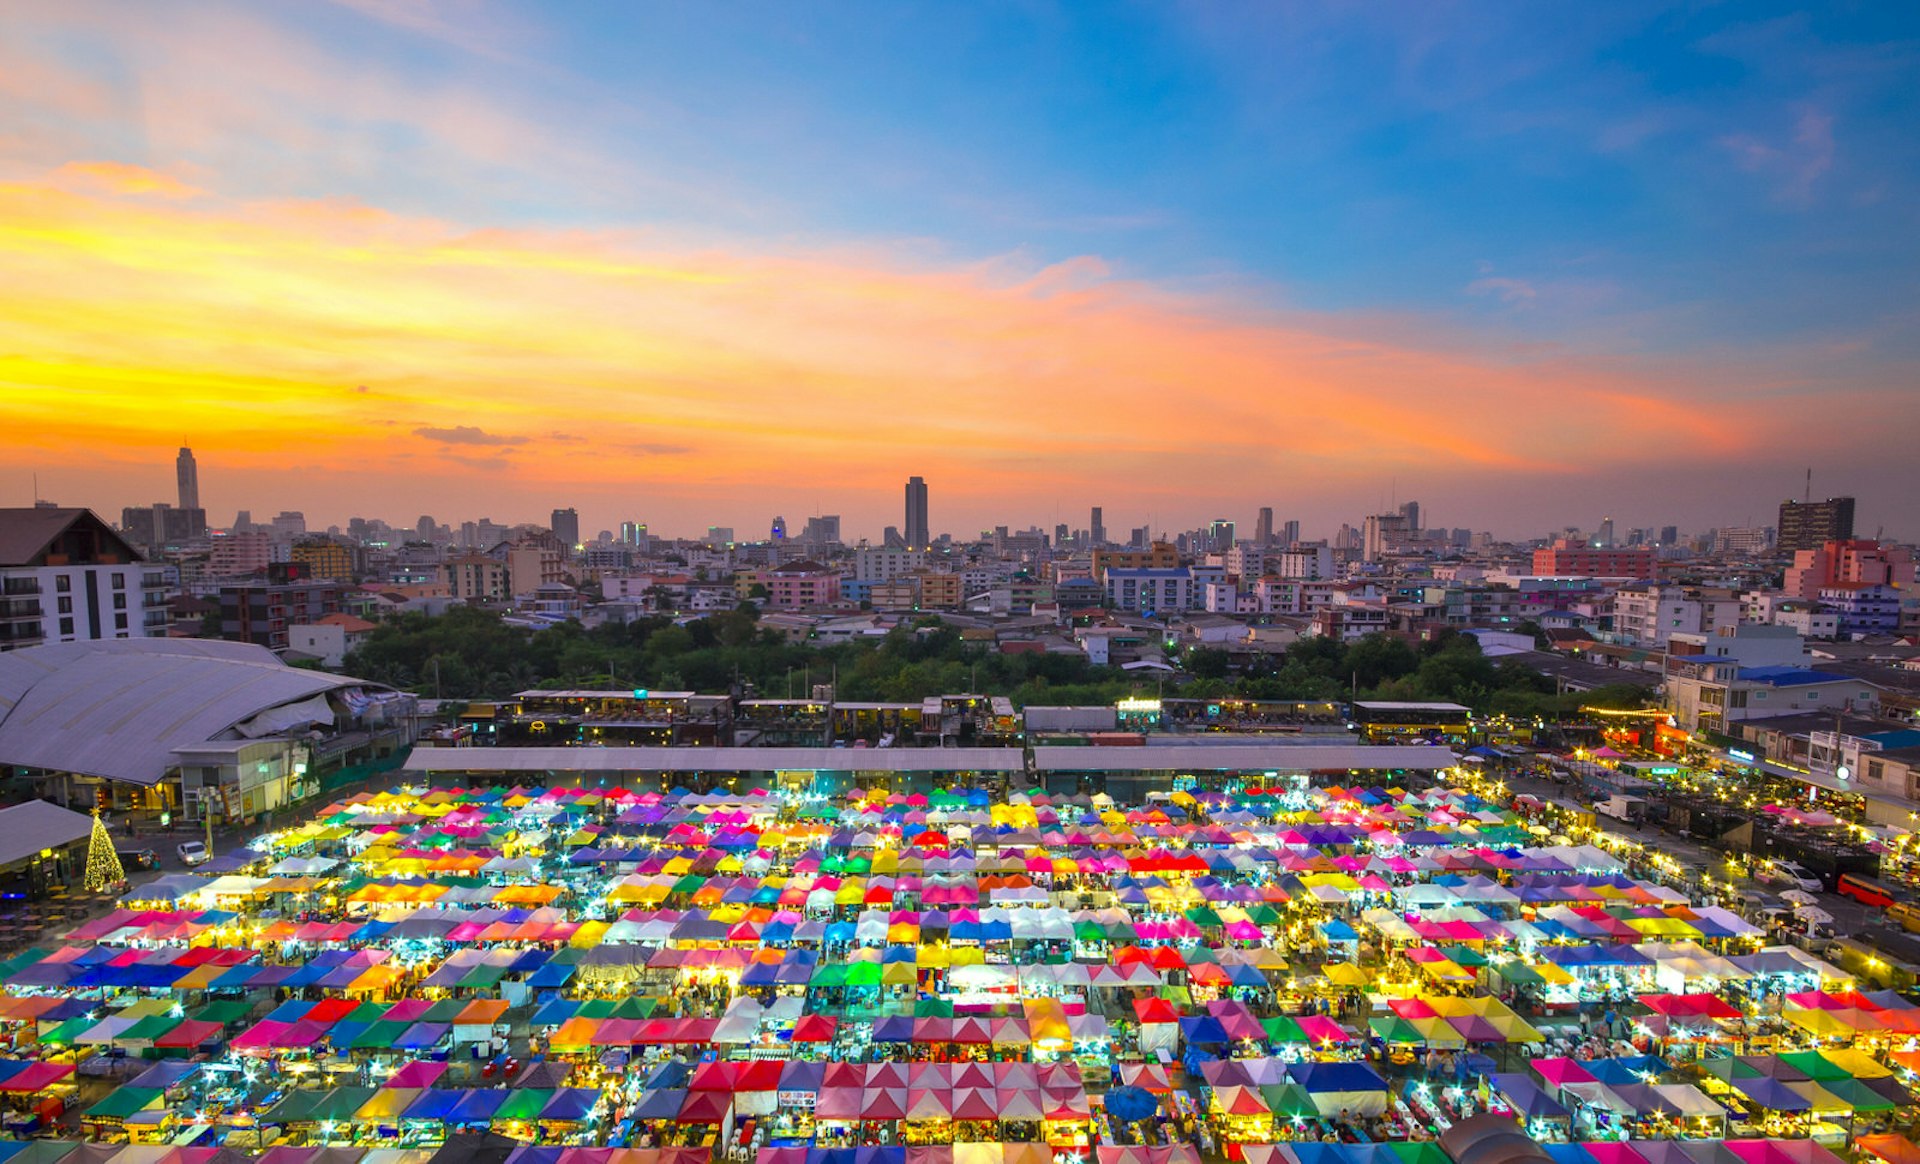 Hemmed in by a dark cityscape beneath a golden sunset is a brilliant square of vibrantly coloured stalls at the Chatuchak Weekend Market